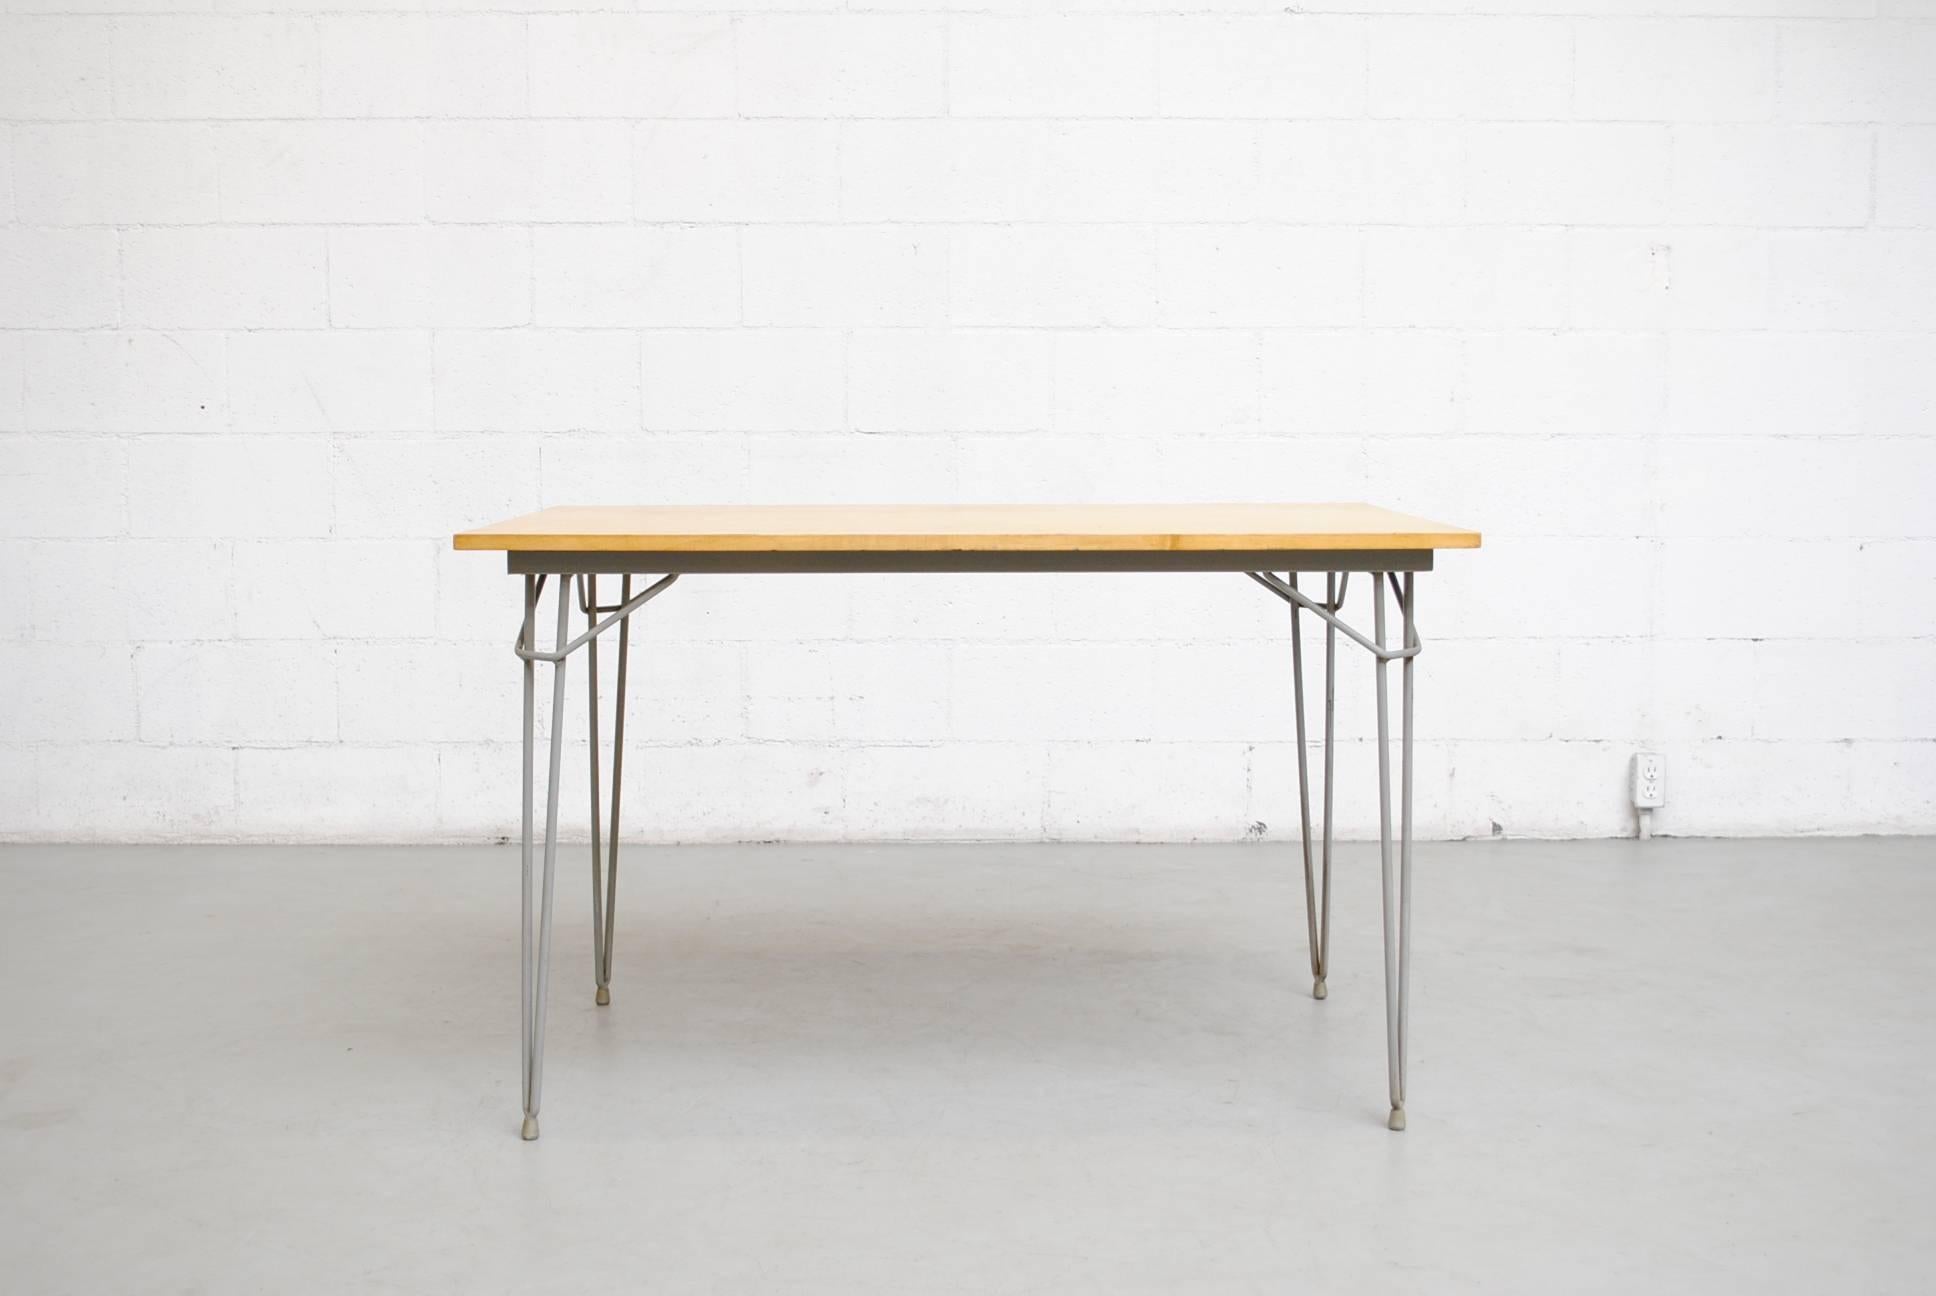 Rare wood topped Kembo table by W.H. Gispen for Kembo with original grey enameled metal hairpin legs with original rubber foot caps. Visible signs of wear consistent with its age and usage. Original condition.